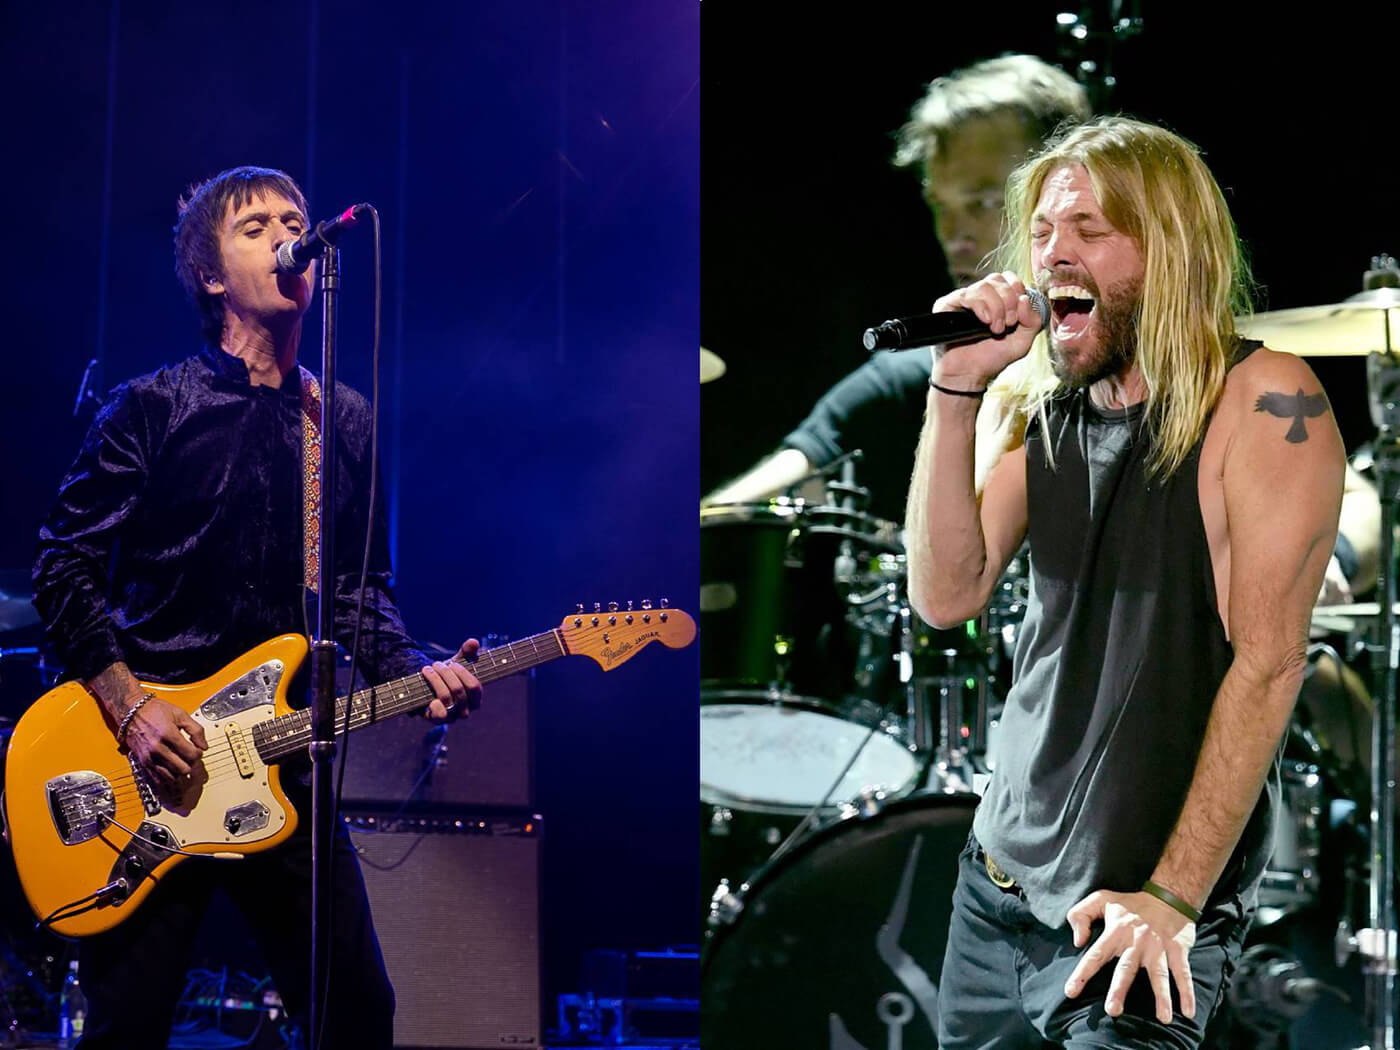 Watch Johnny Marr dedicate “There Is A Light…” to Taylor Hawkins